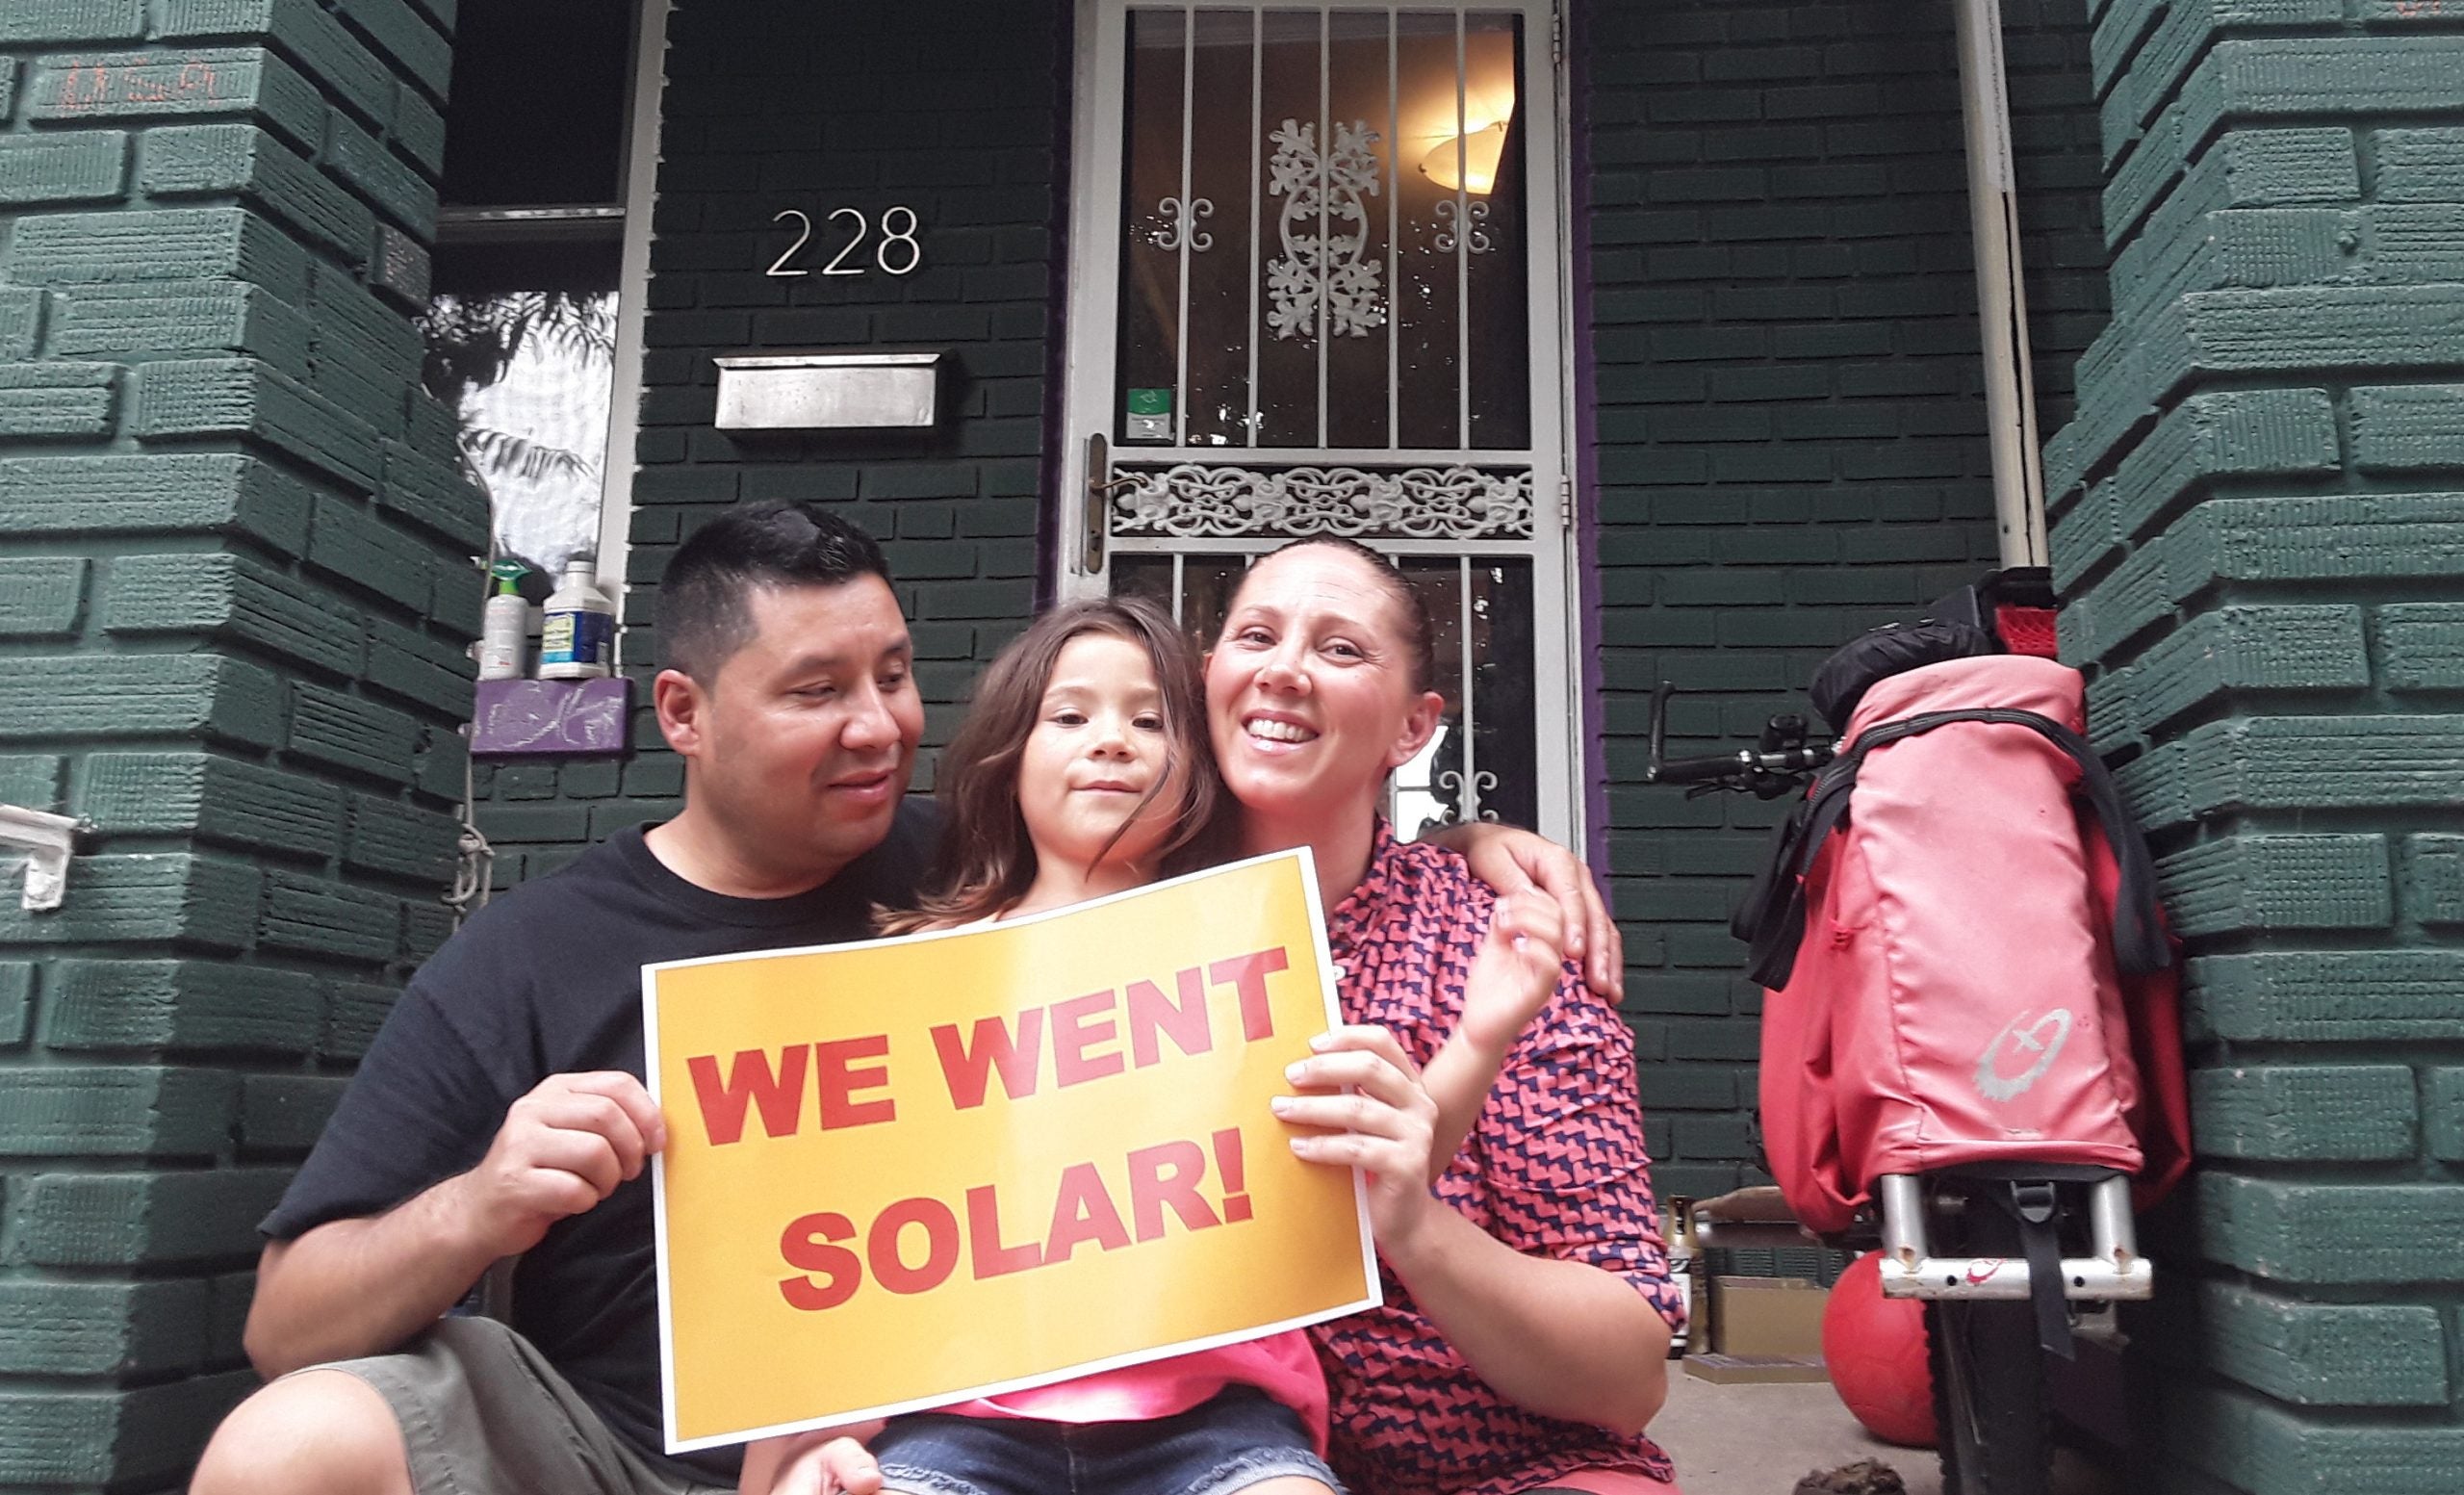 Pergola family holding "we went solar" sign on front porch